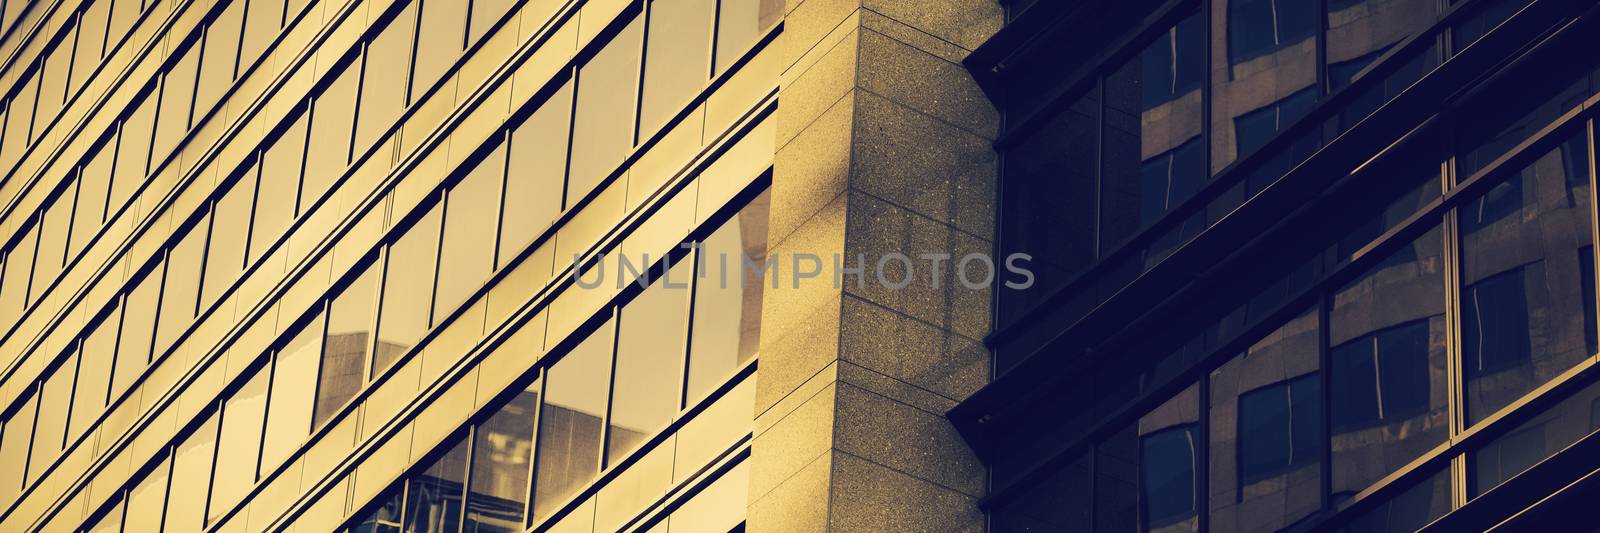 close-up of glass office building  by Wavebreakmedia